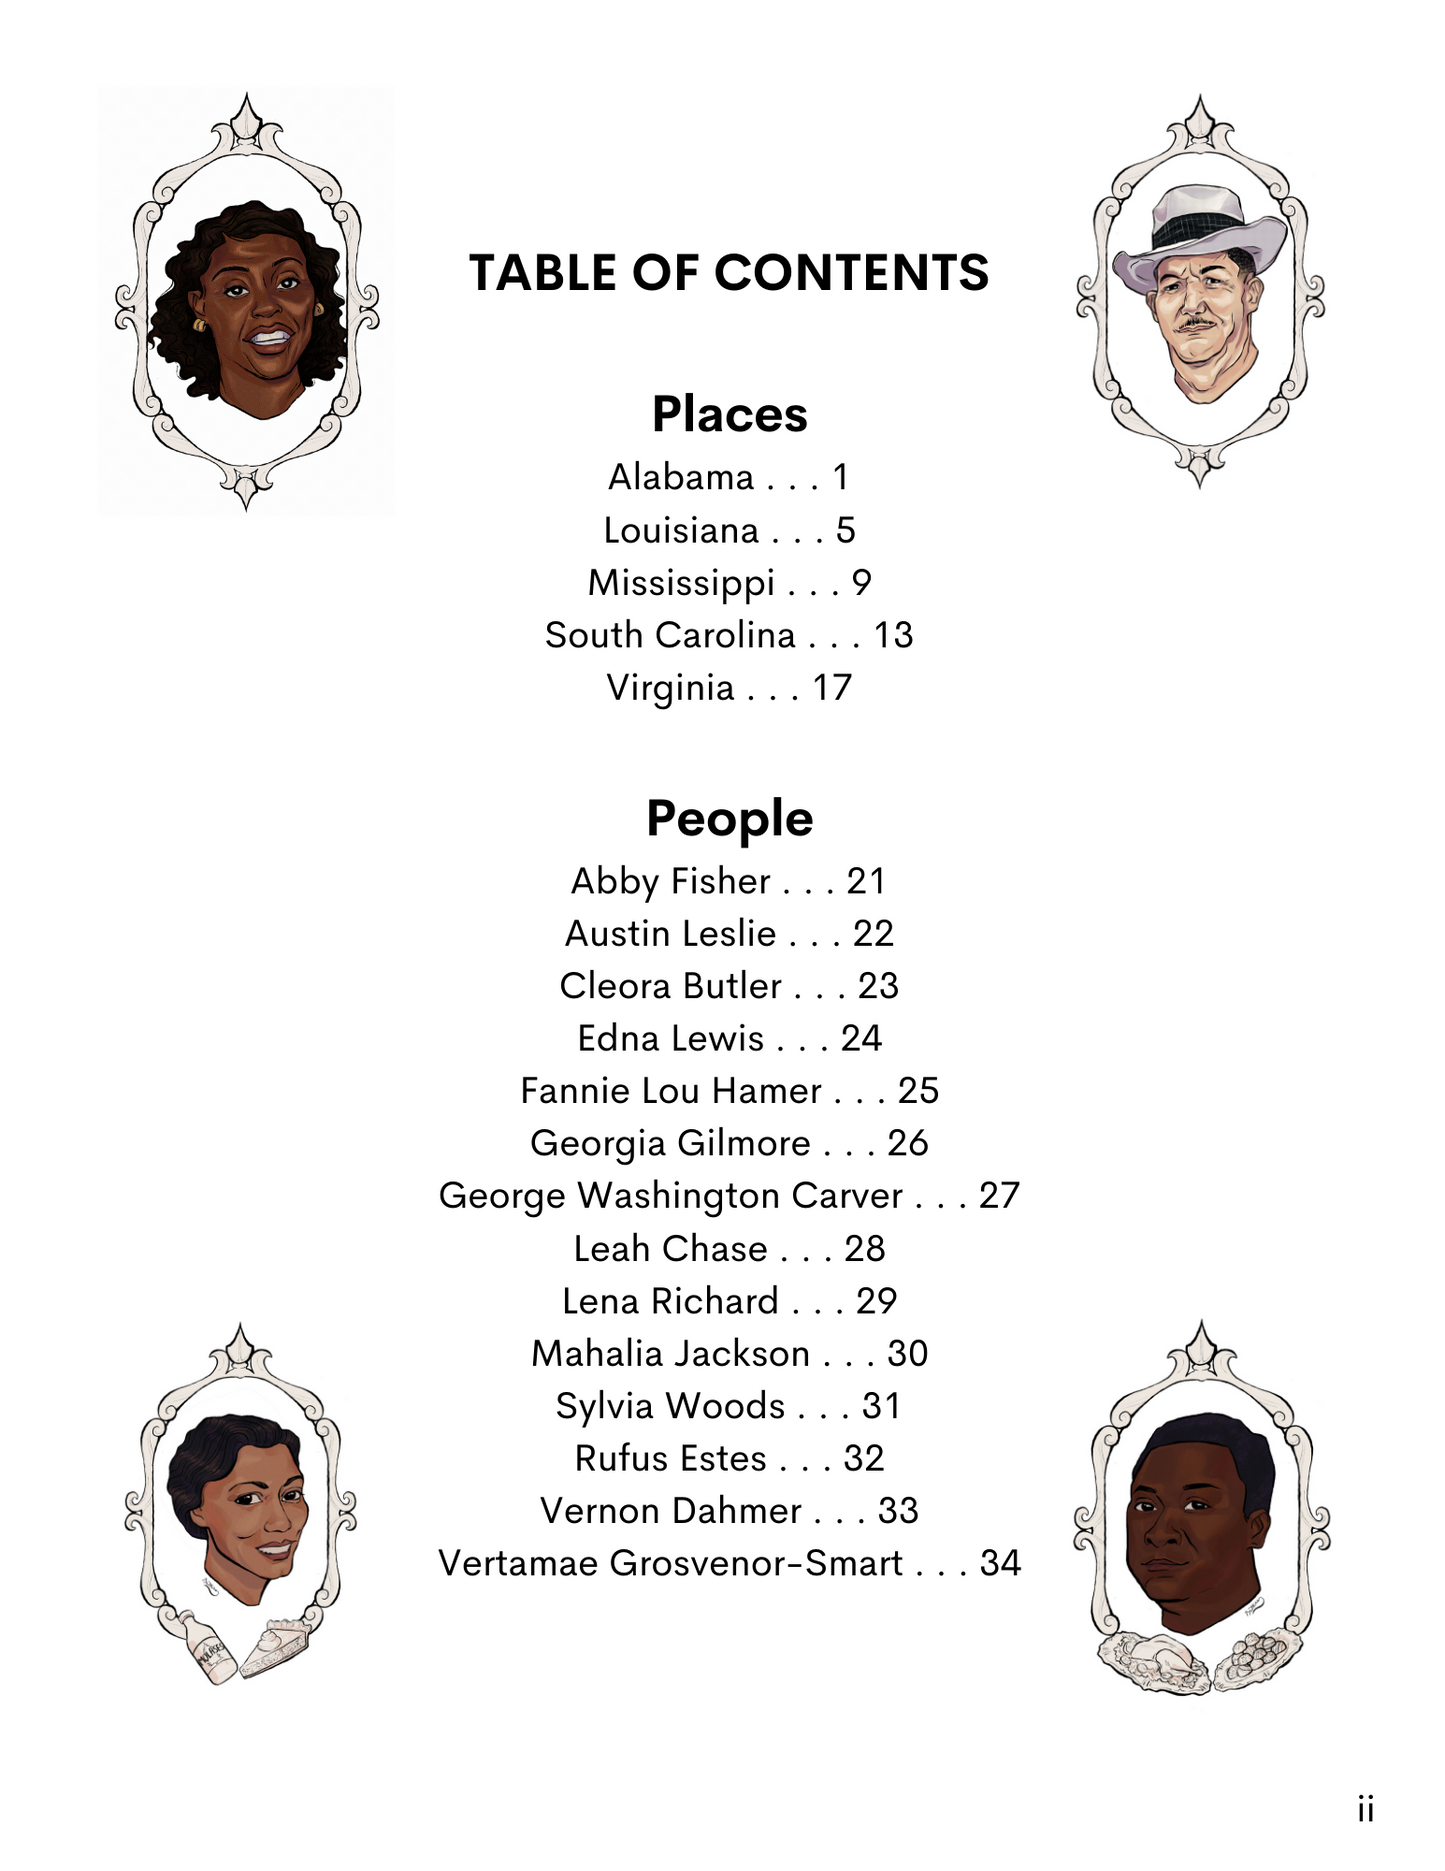 Table of contents listing the people and places featured in the curriculum,